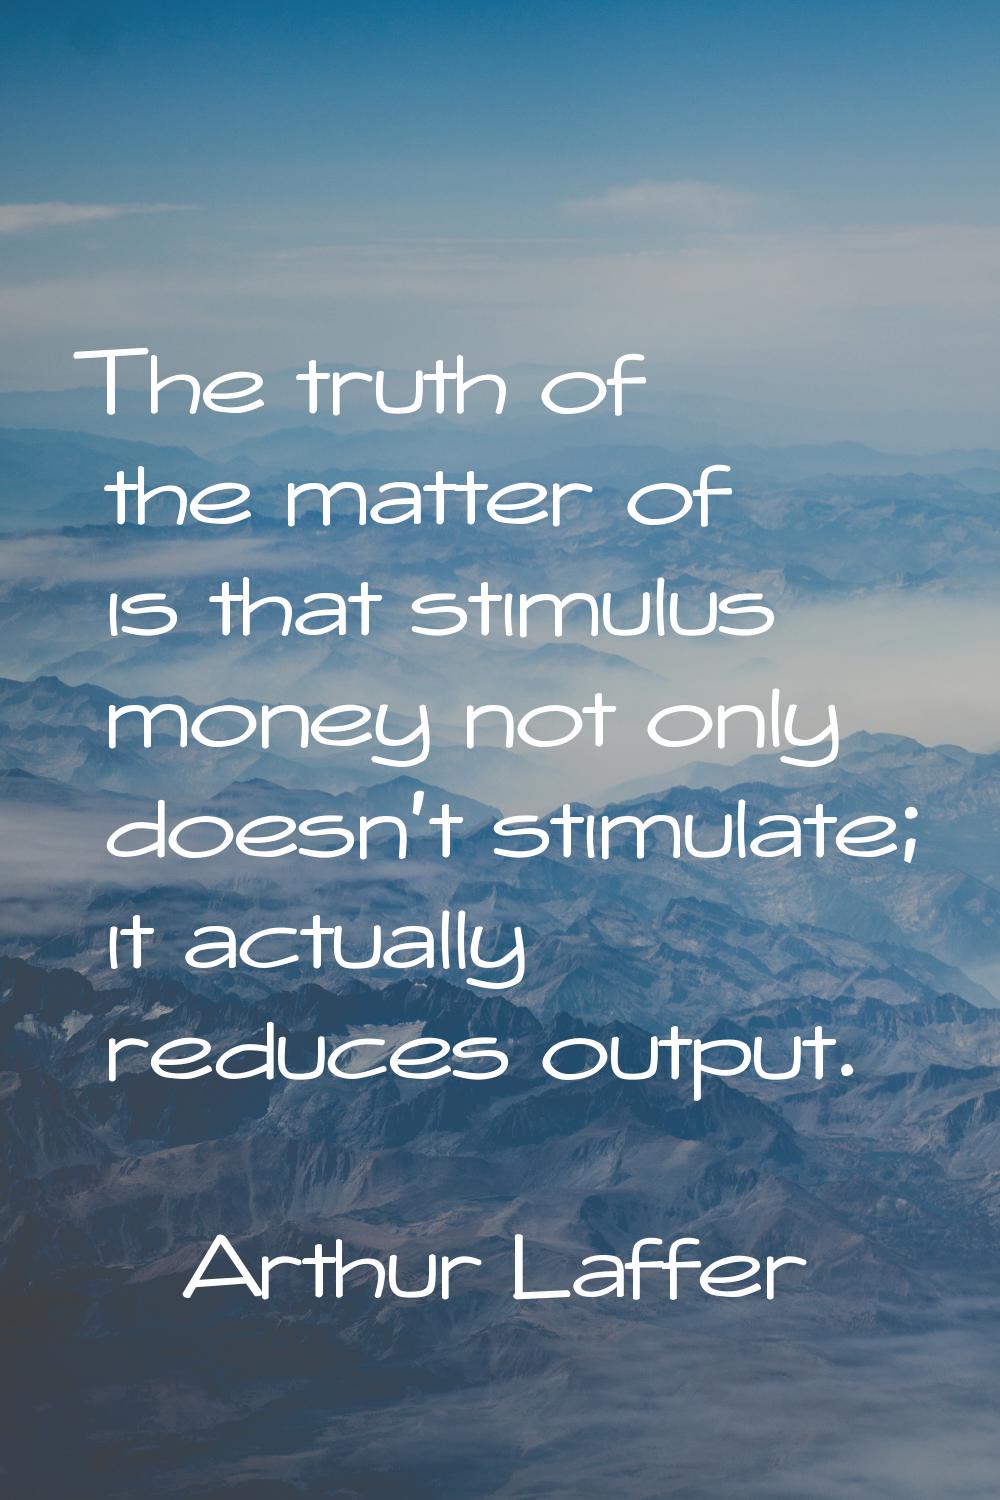 The truth of the matter of is that stimulus money not only doesn't stimulate; it actually reduces o